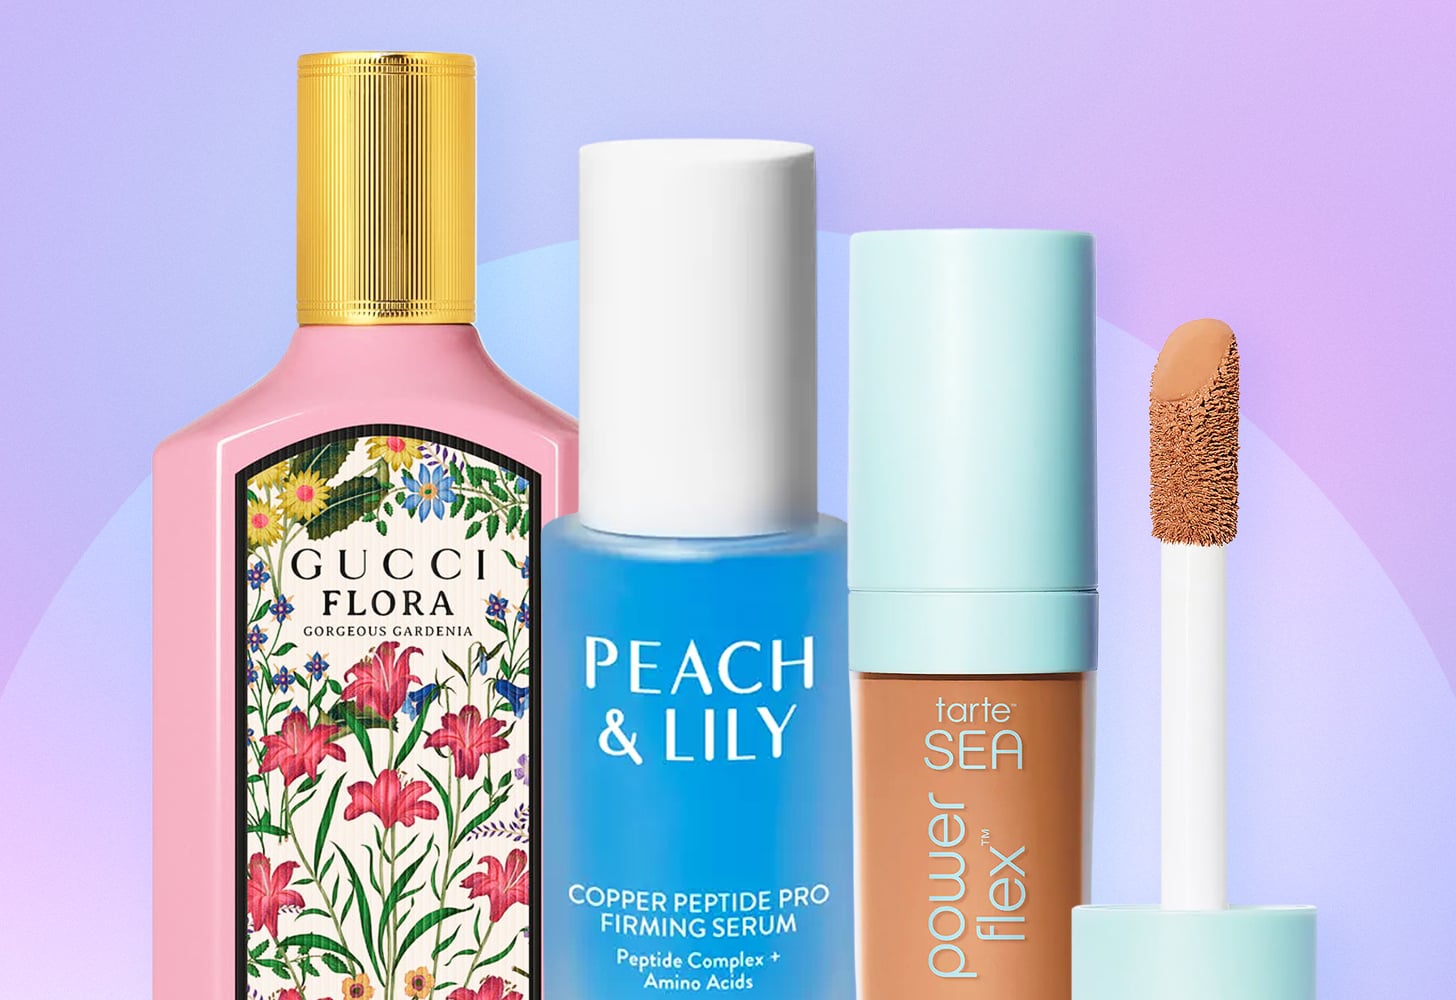 32 Sephora Savings Event Deals in 2023 to Shop Now